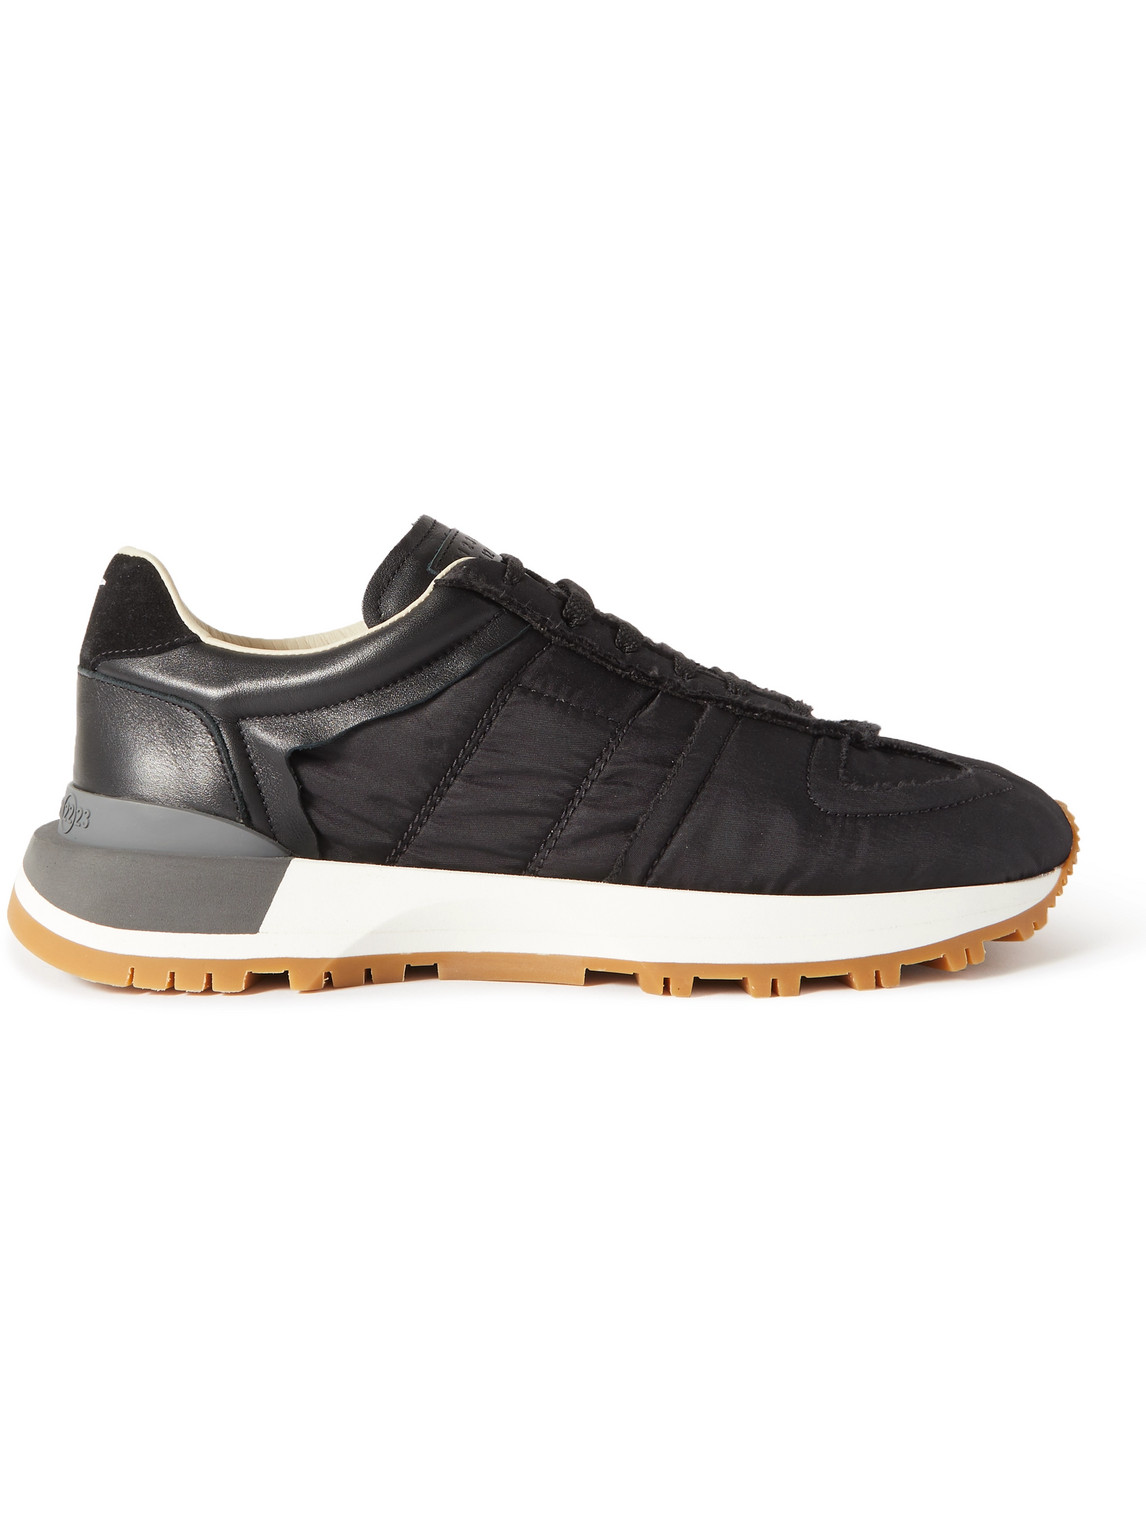 MAISON MARGIELA RUNNER LEATHER AND SUEDE-TRIMMED NYLON SNEAKERS